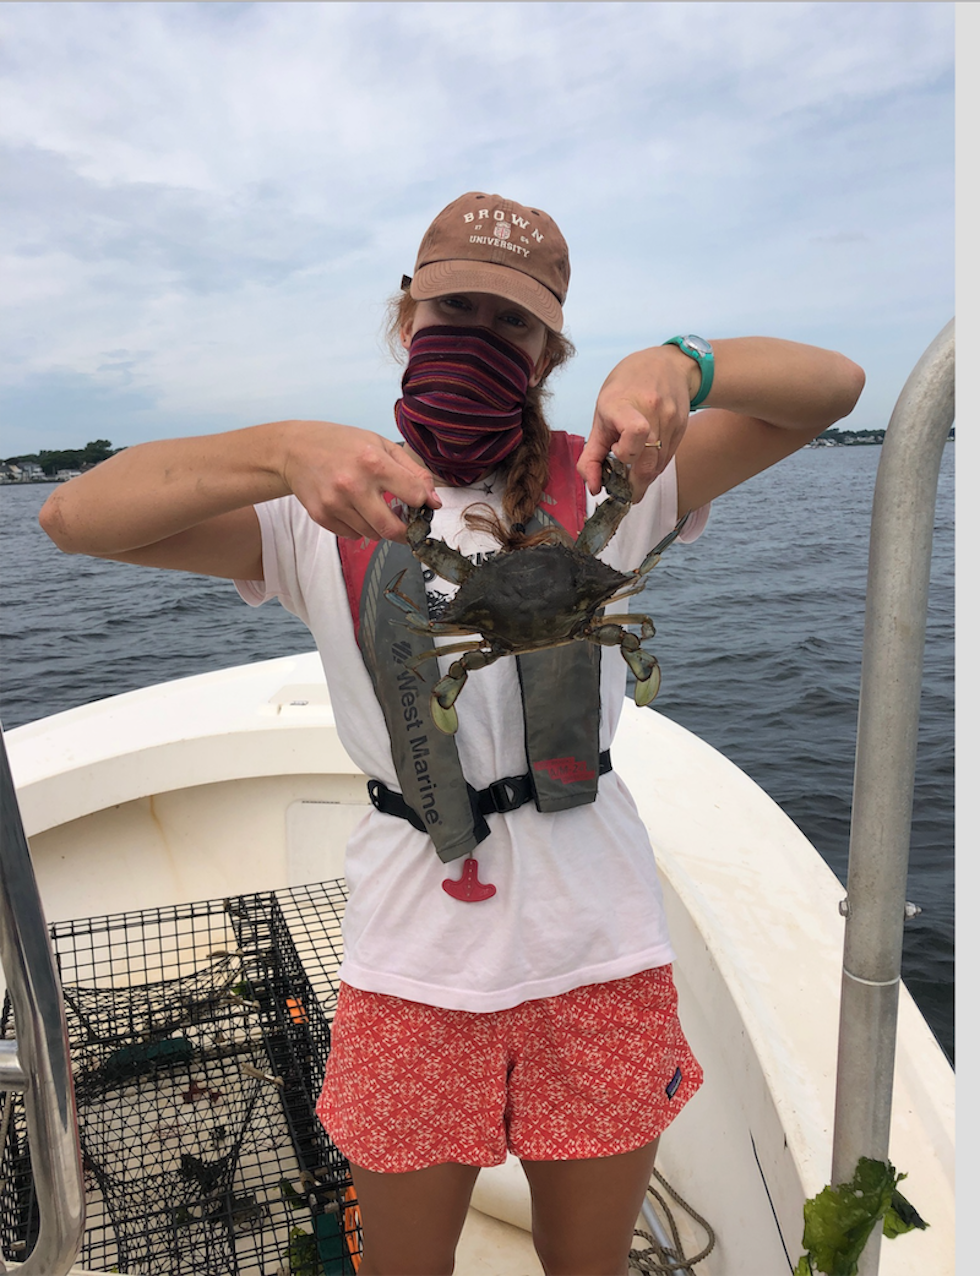 greta welch wears a face covering and holds a crab on a fishing boat